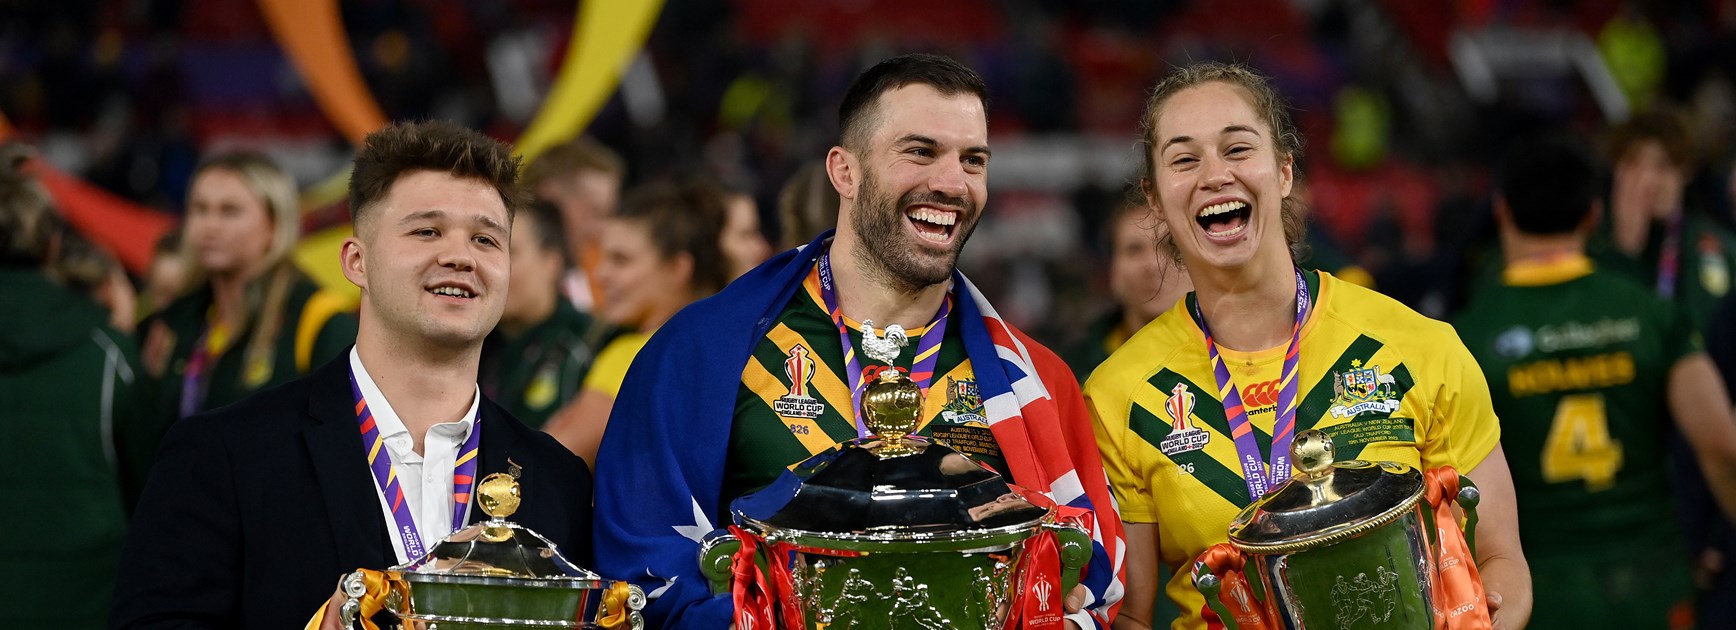 ARLC welcomes Rugby League World Cup 2026 hosting rights